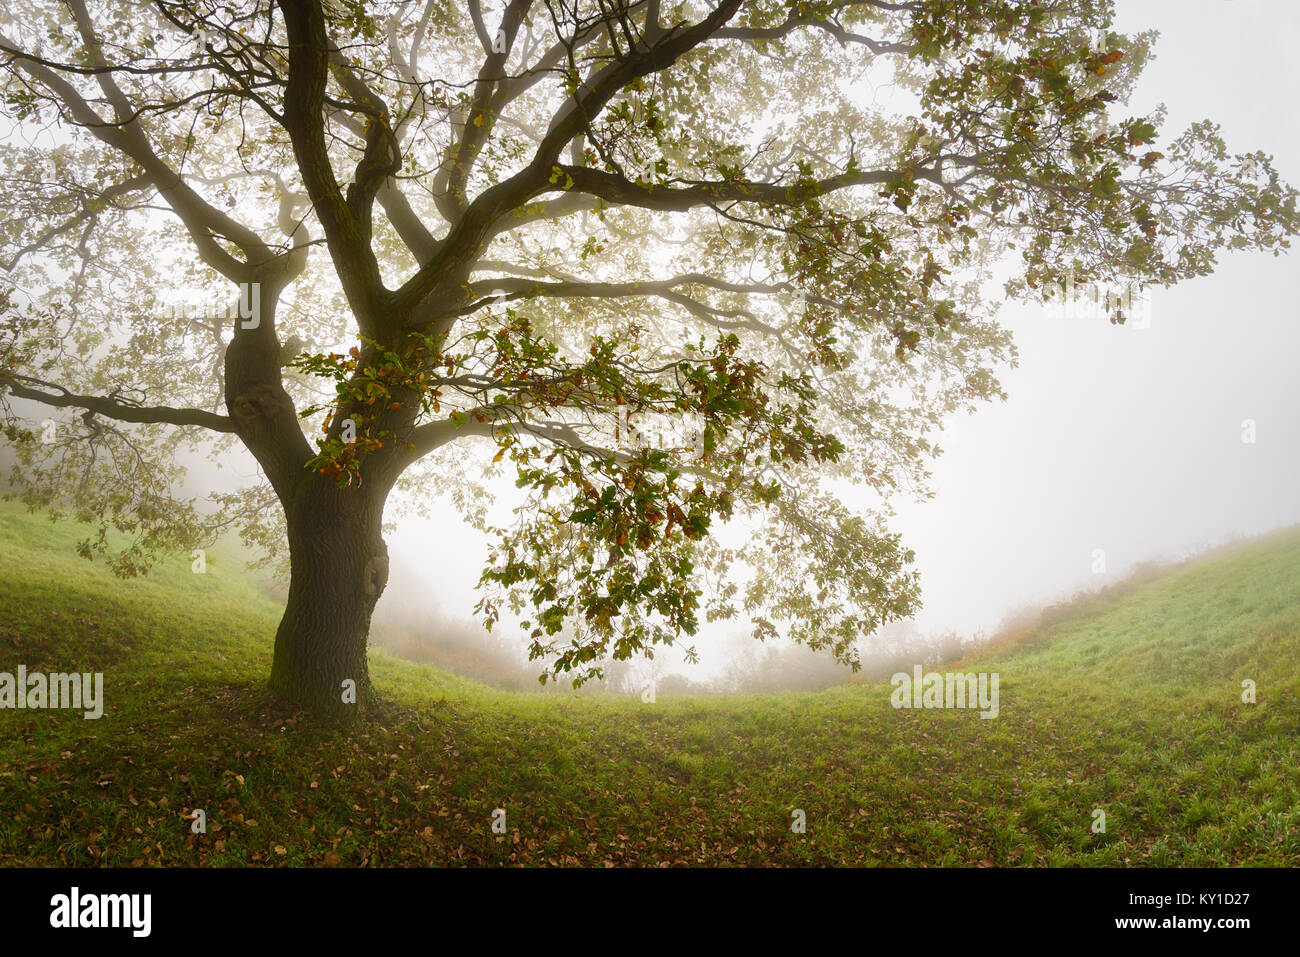 A knobby oak tree wreathed in mist, morning light in autumn, Erpeler Ley, fog arose from the Rhine Valley, Germany, Europe Stock Photo